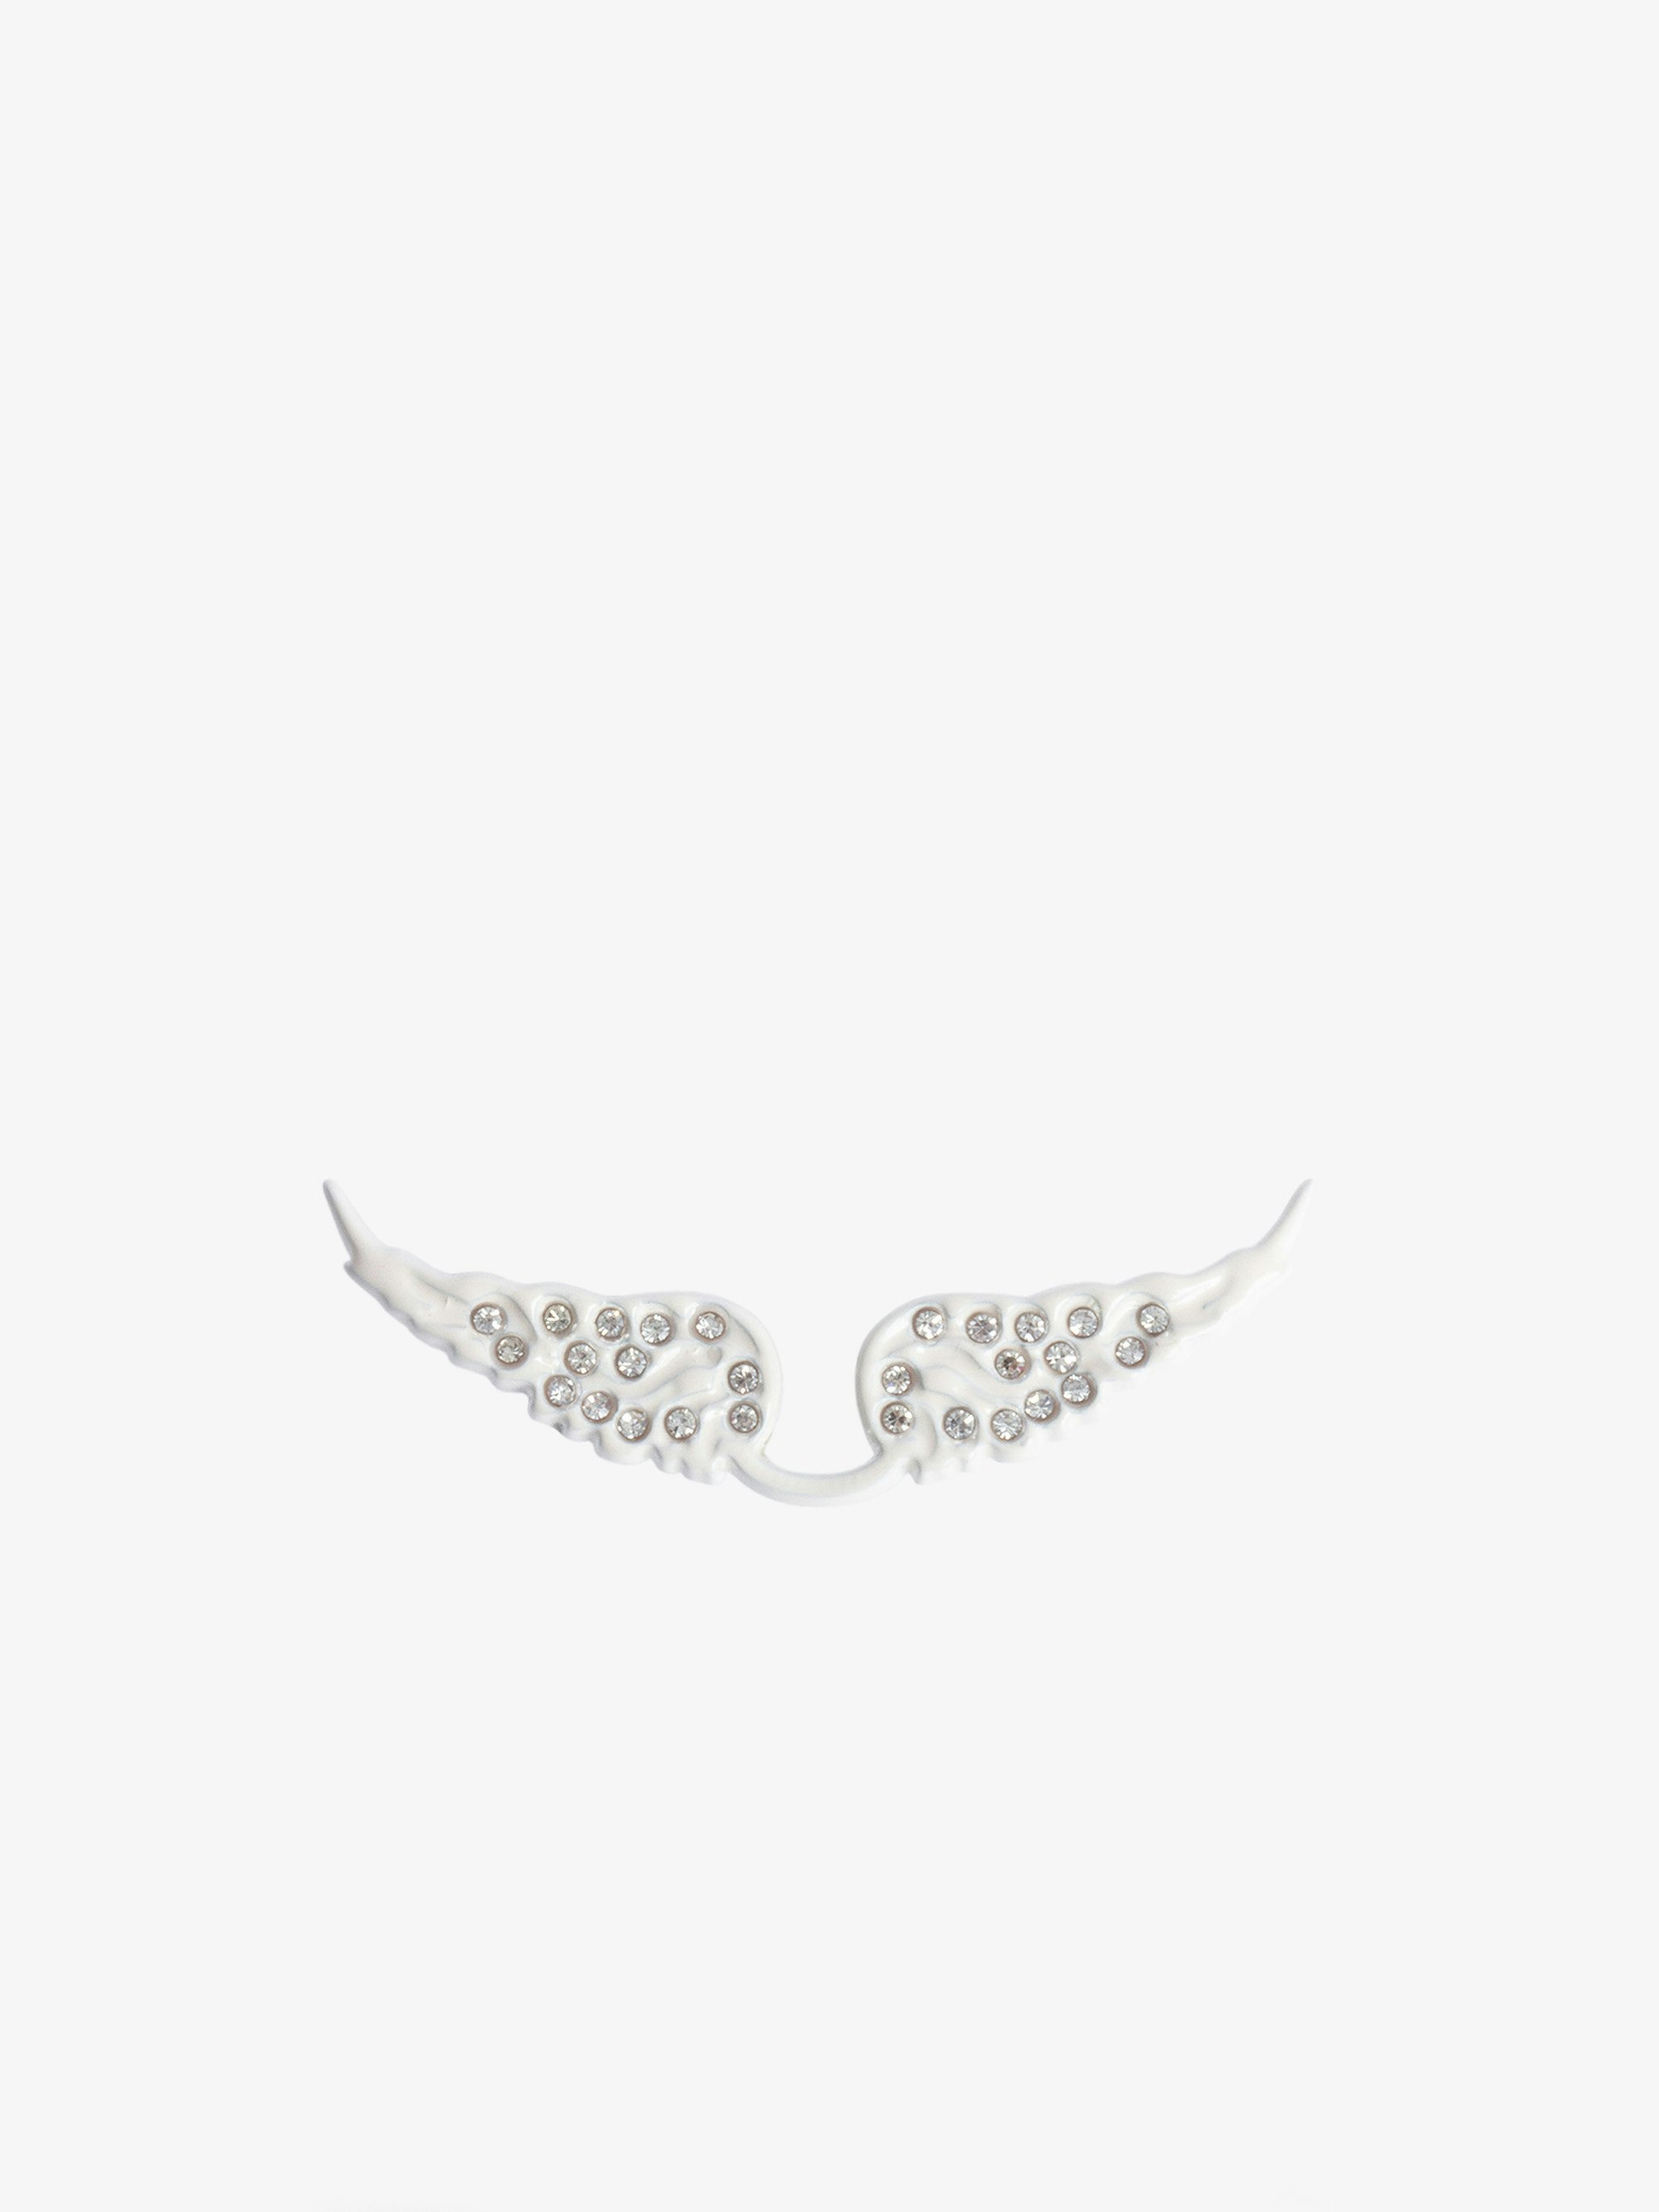 SWING YOUR WINGS Lace Charms - Lace charms embellished with crystals